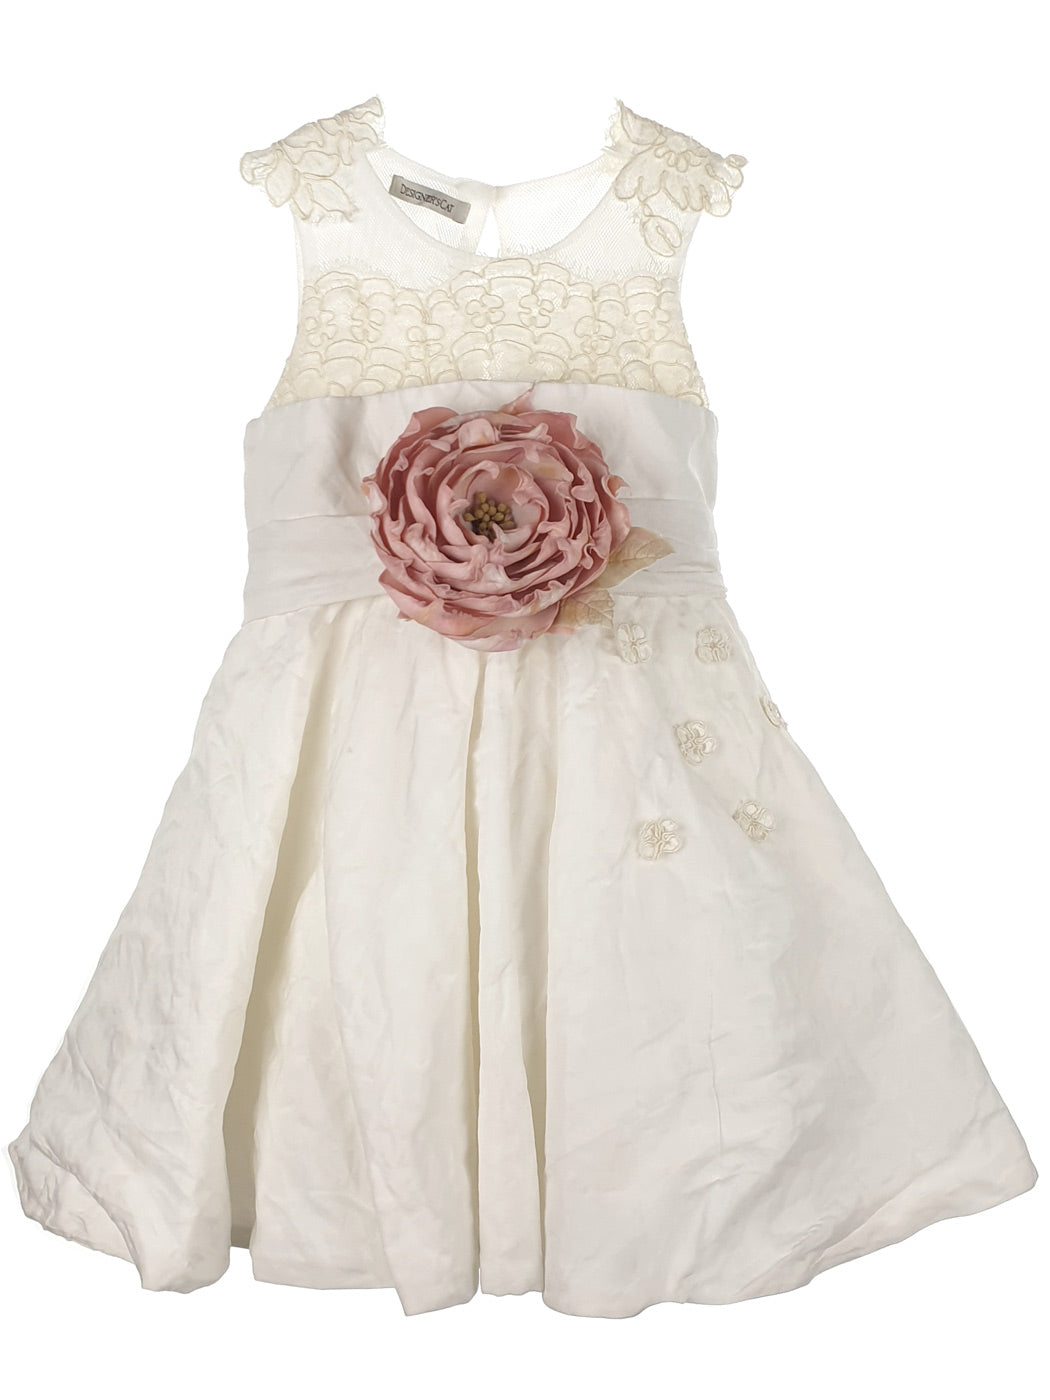 Baptism silk Dress with lace - MAY